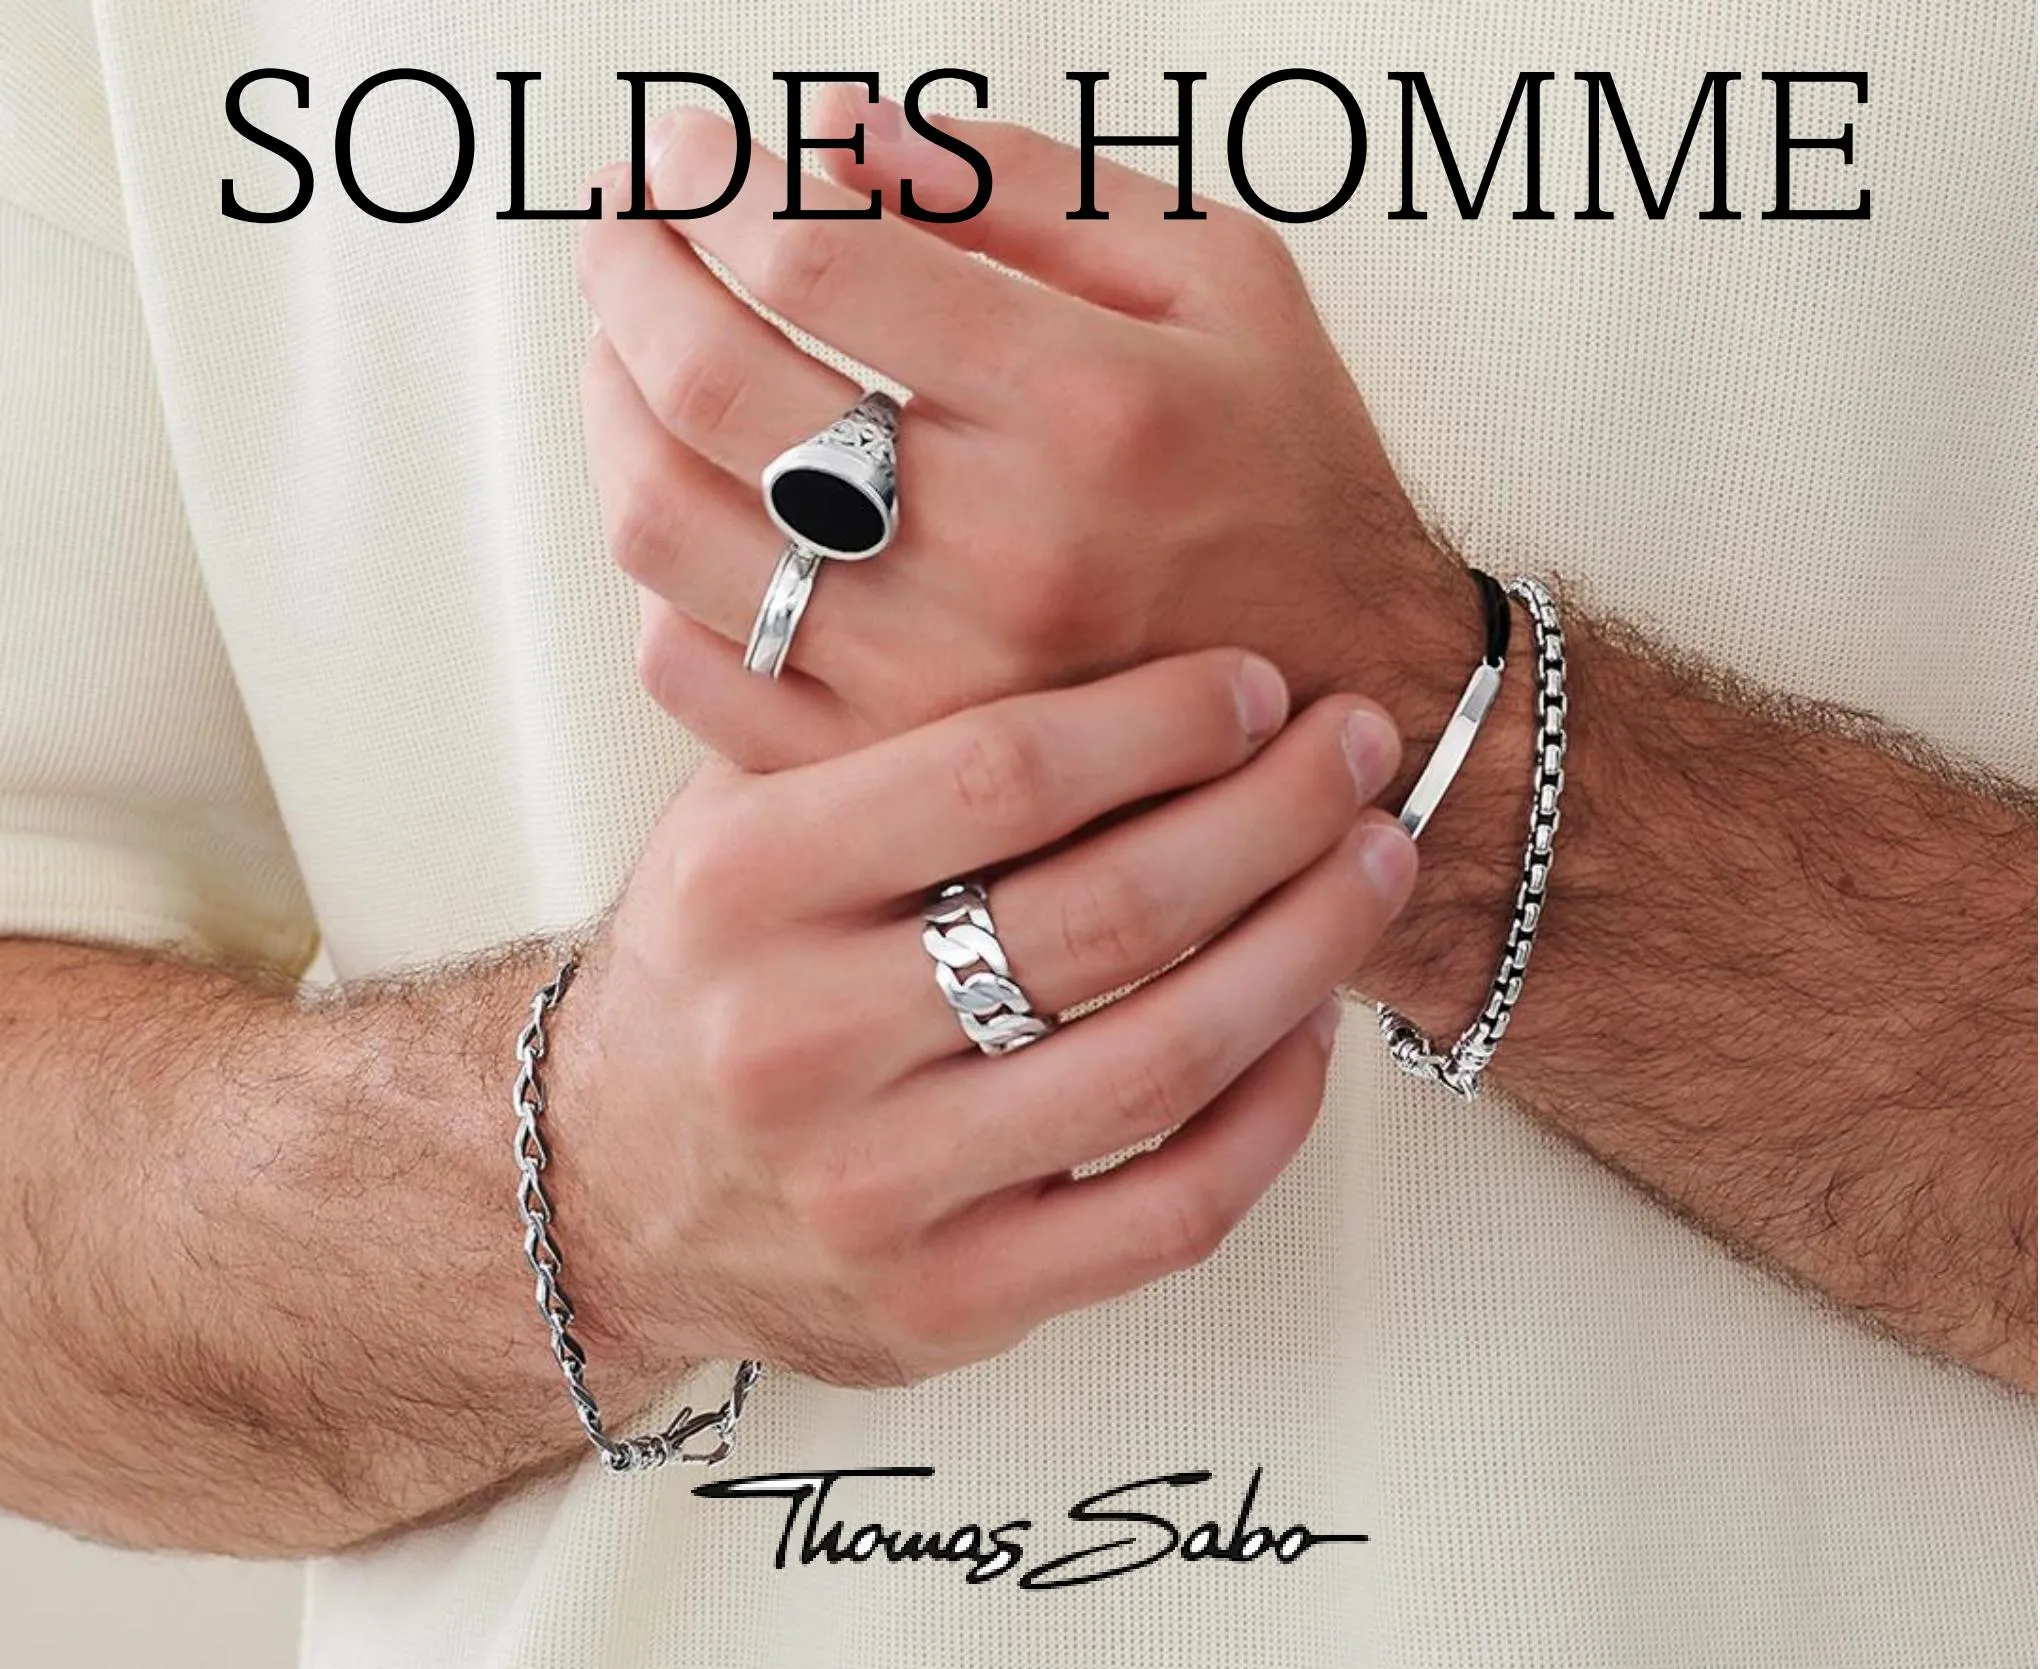 Catalogue SOLDES HOMME, page 00001